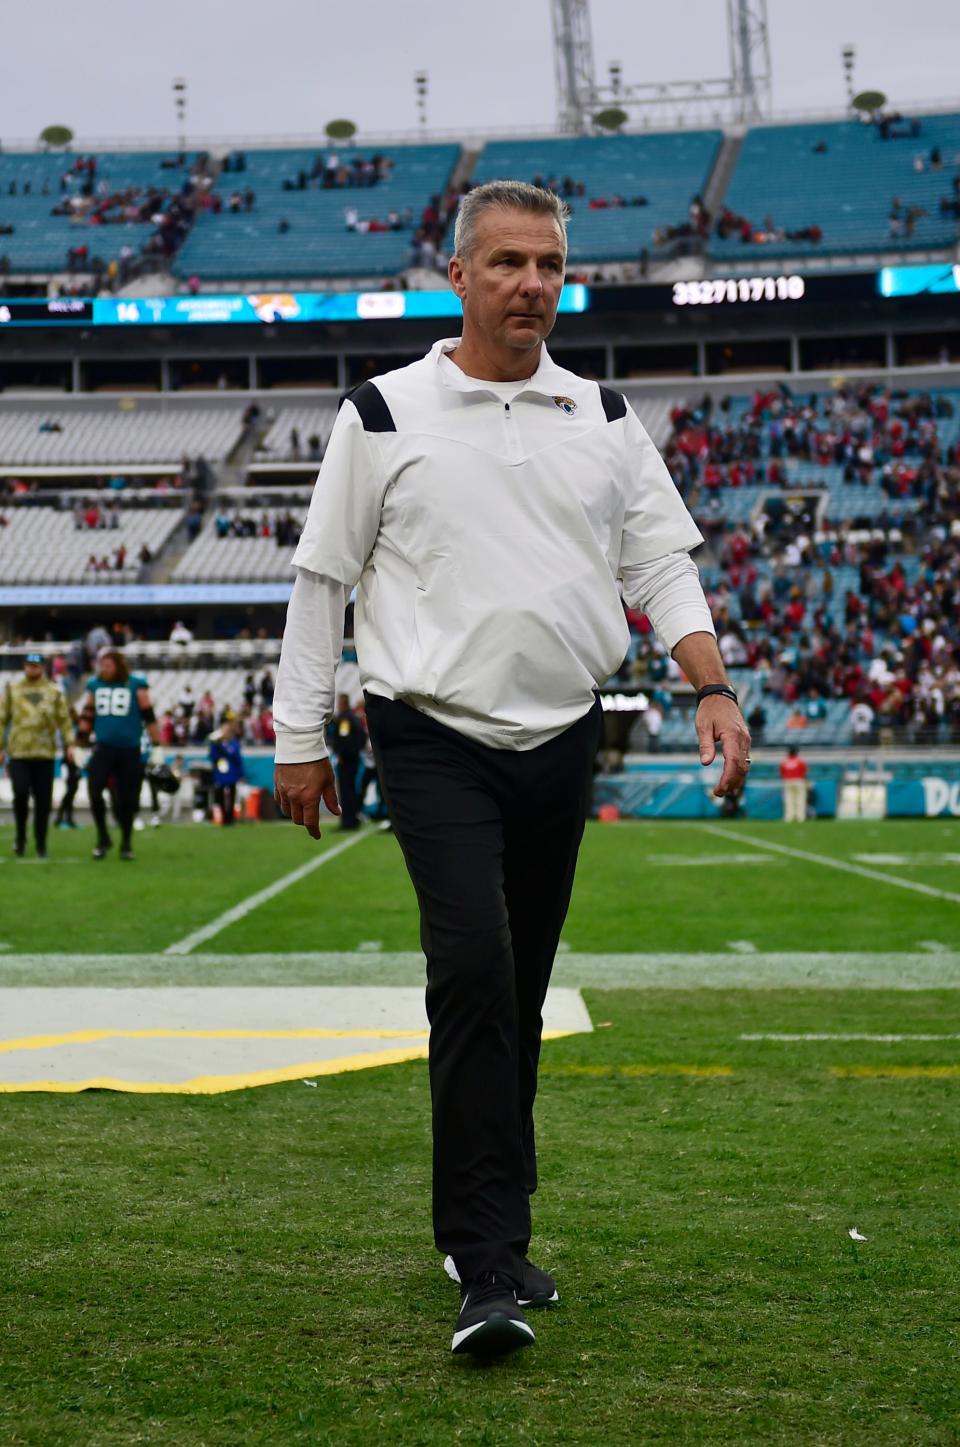 Jaguars coach Urban Meyer was fired early Thursday morning by owner Shad Khan.